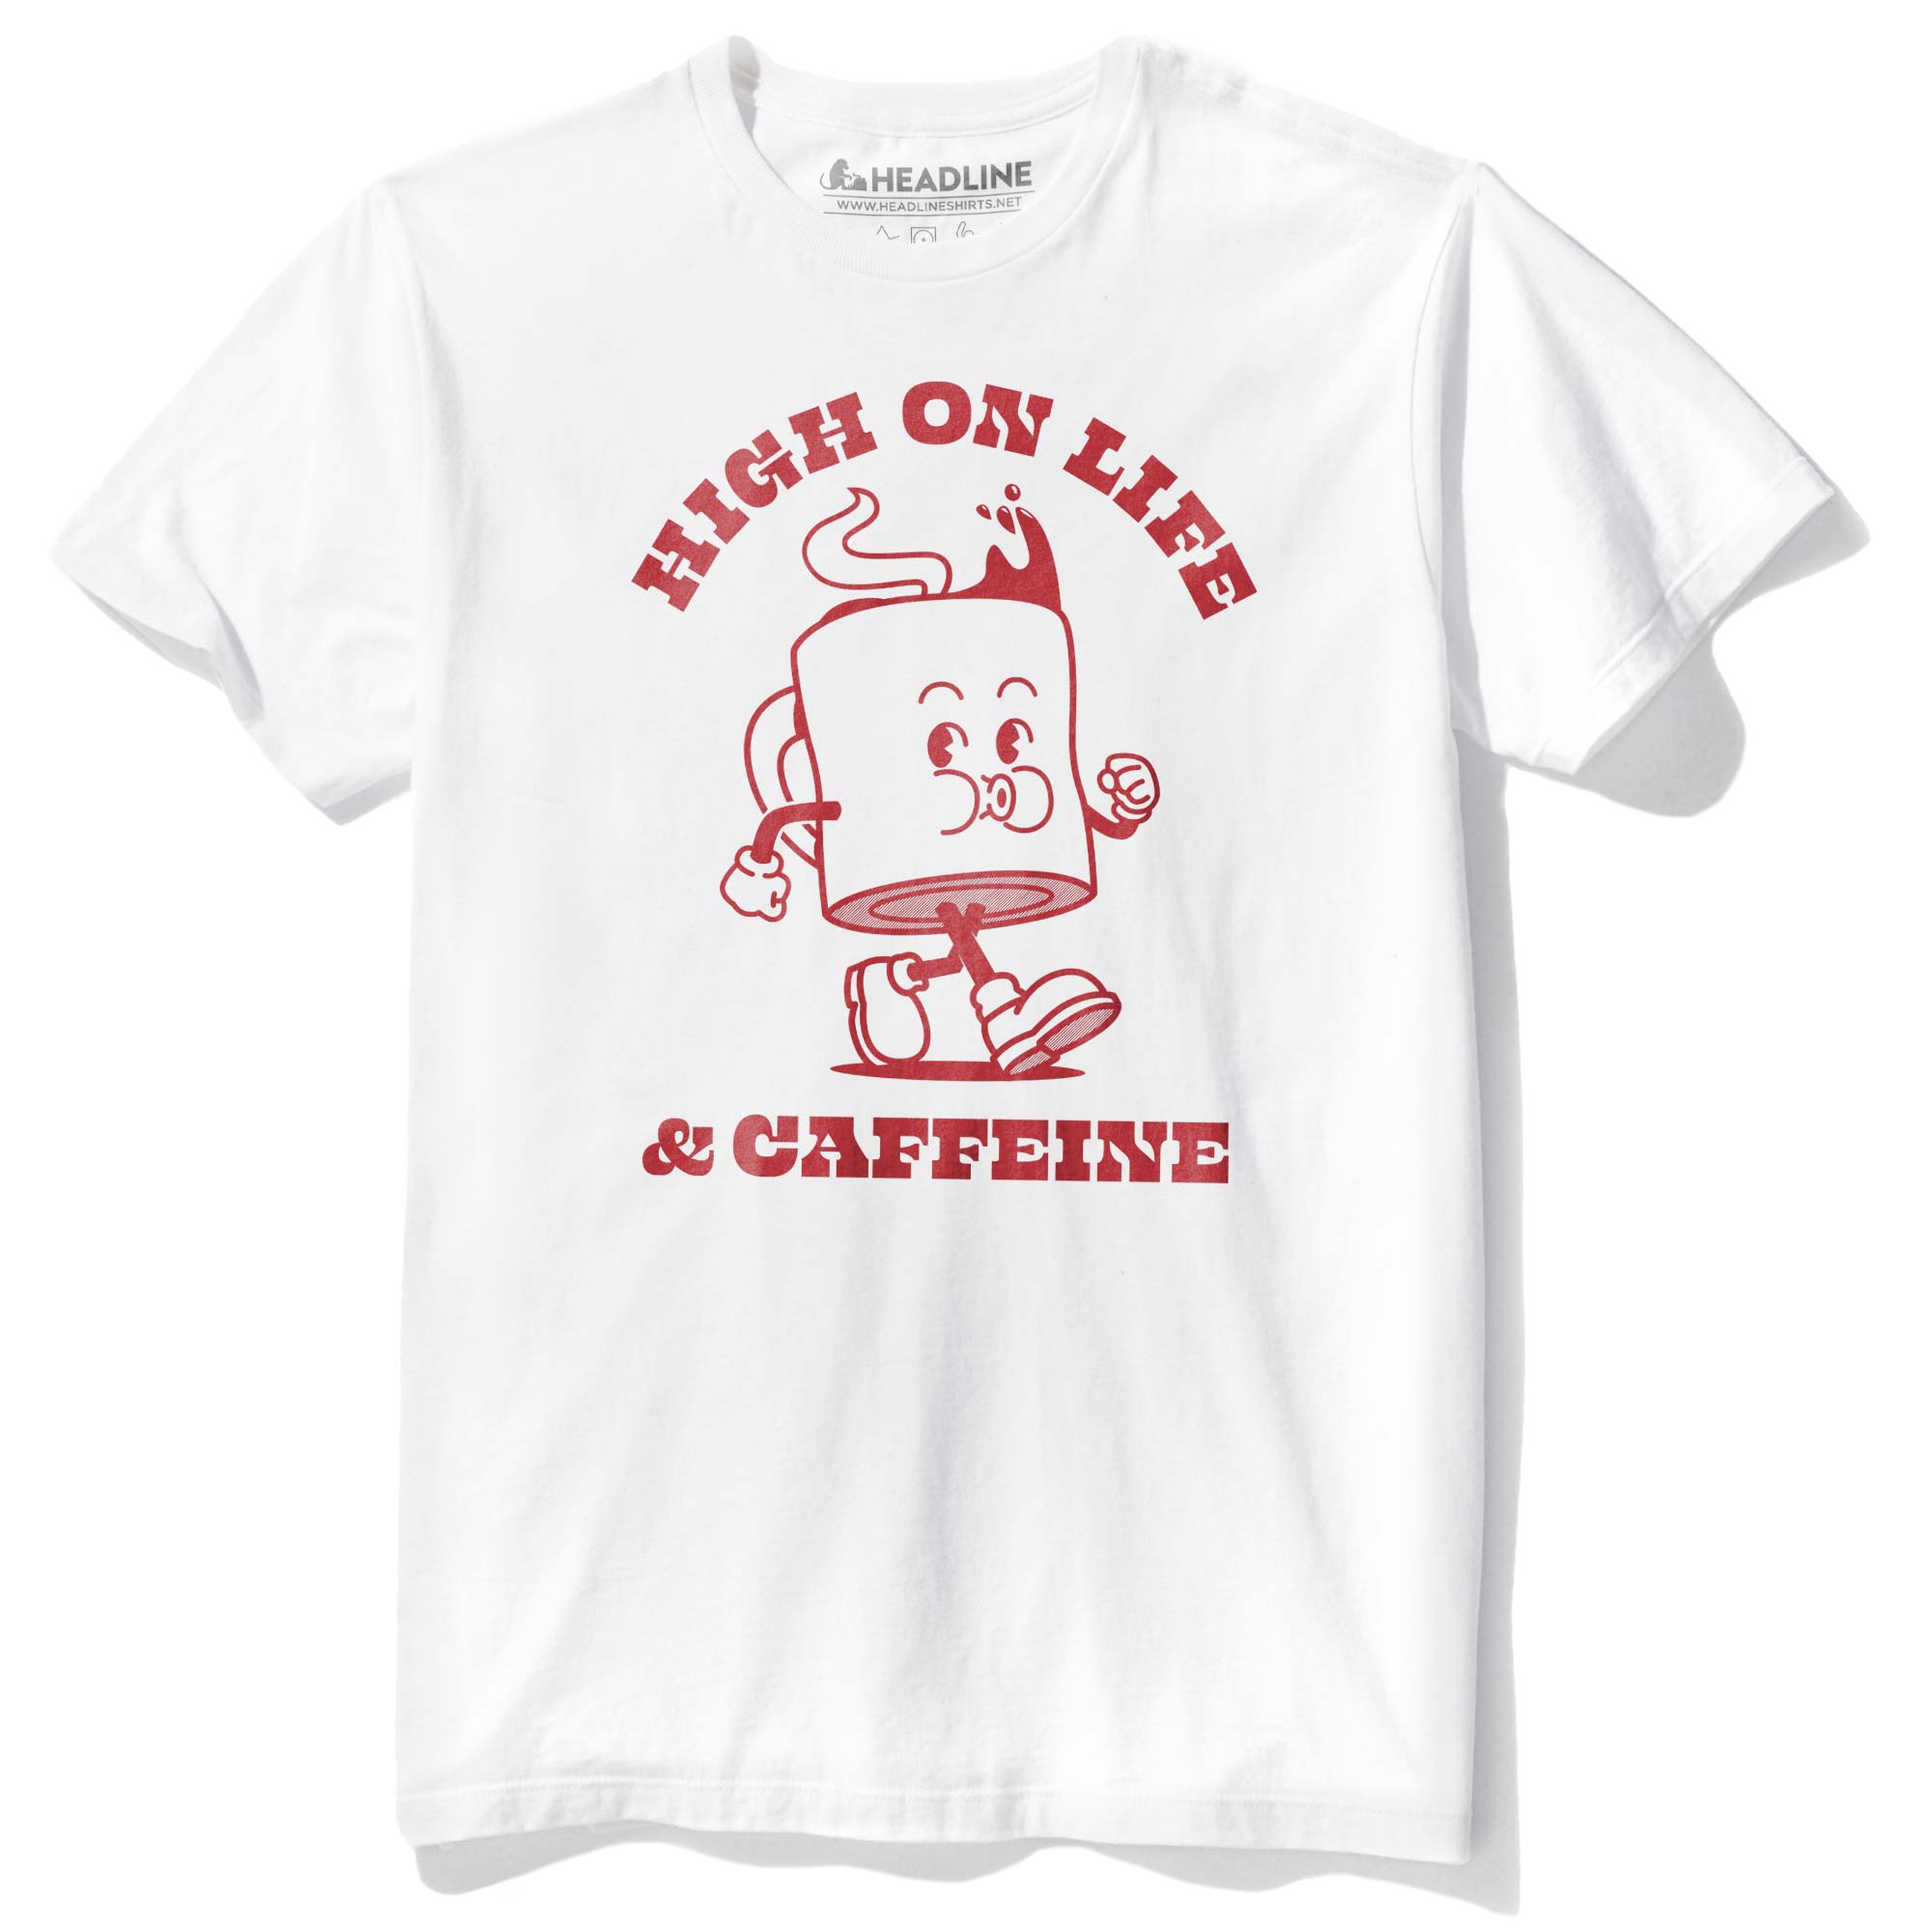 Men's High On Life & Caffeine Funny Graphic T-Shirt | Cool Coffee Mug Whistling Tee | Solid Threads